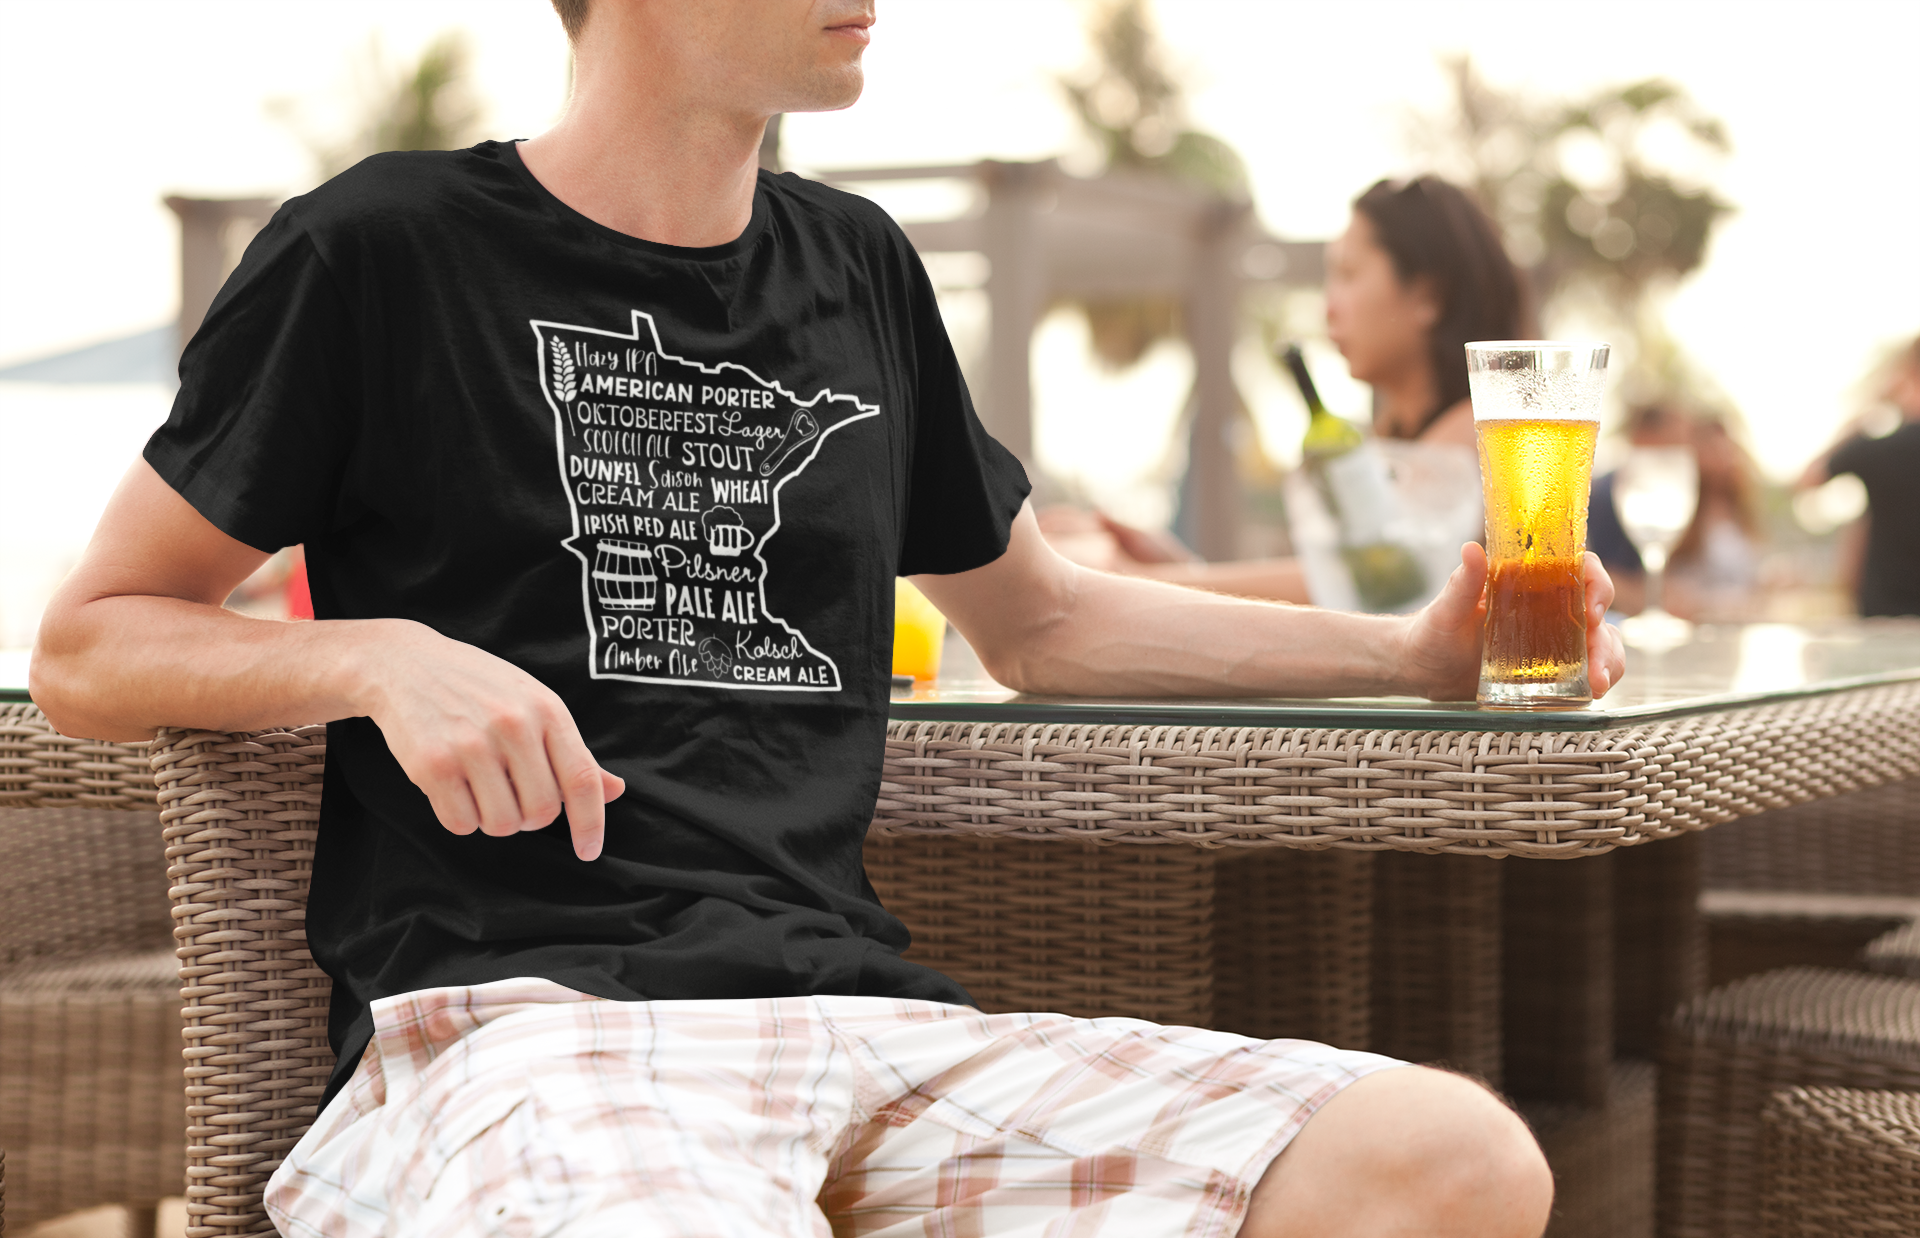 Male model sitting at a table with a beer in his hand and wearing the black Minnesota Beers - T-Shirt with hazy ipa, American porter, Oktoberfest, lager, scotch ale, stout, dunkel, saison, wheat, cream ale, Irish red ale, pilsner, pale ale, porter, kolsch, amber ale, cream ale on the front in the state of Minnesota with icons of a hop, glass of beer, barrel of beer, bottle opener, and a wheat strand.